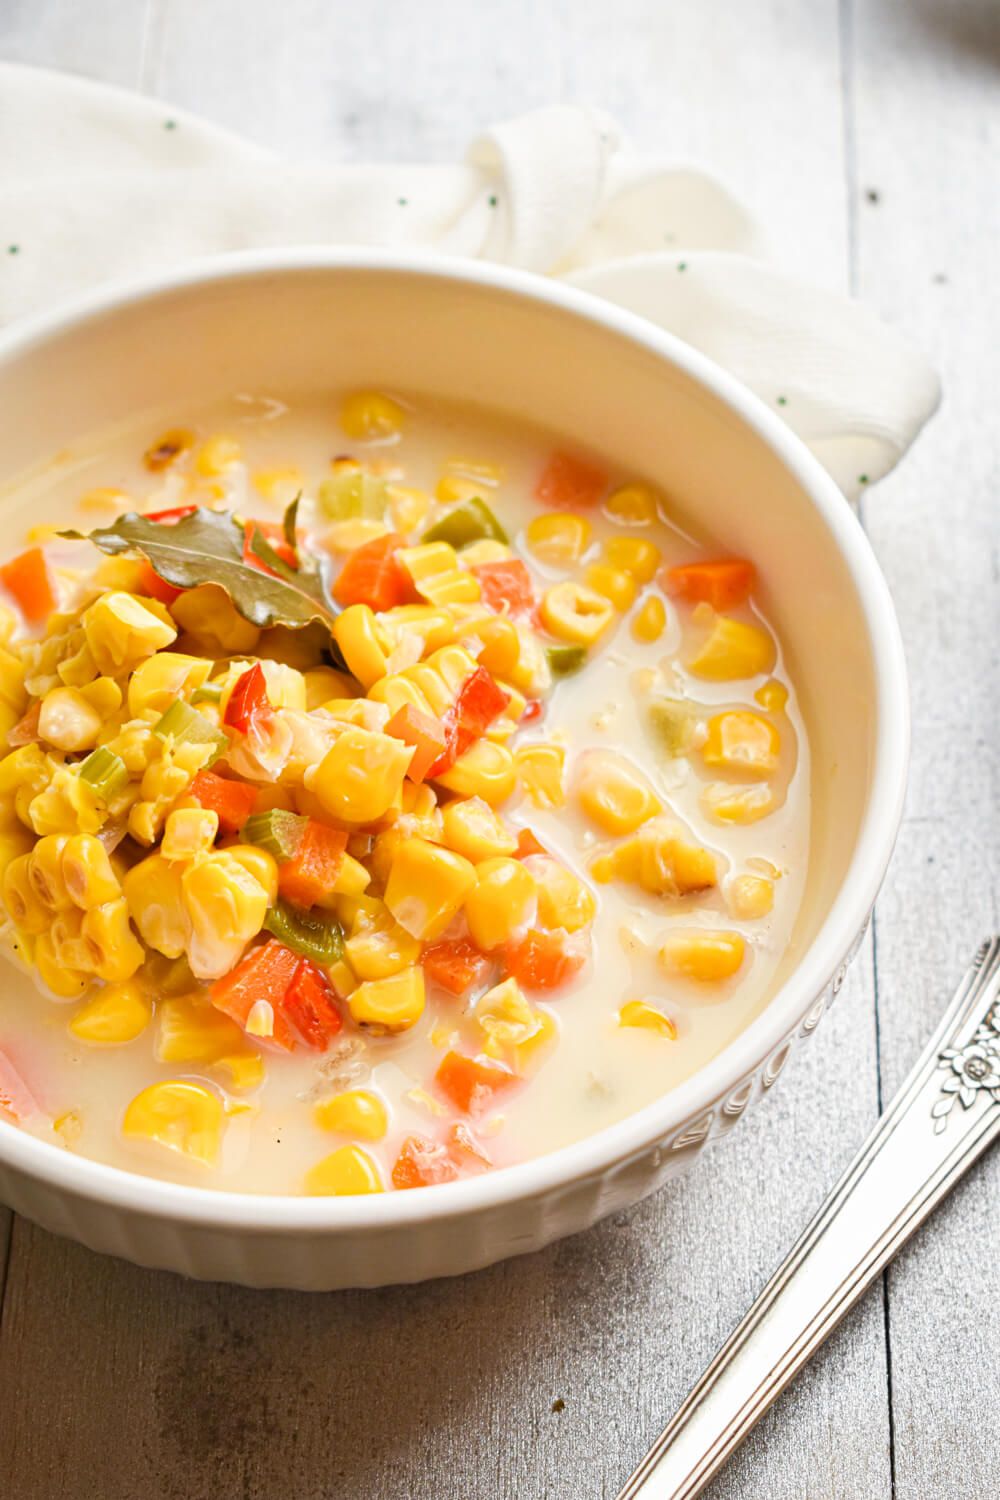 Crockpot roasted corn chowder with vegetables in a bowl with a napkin.